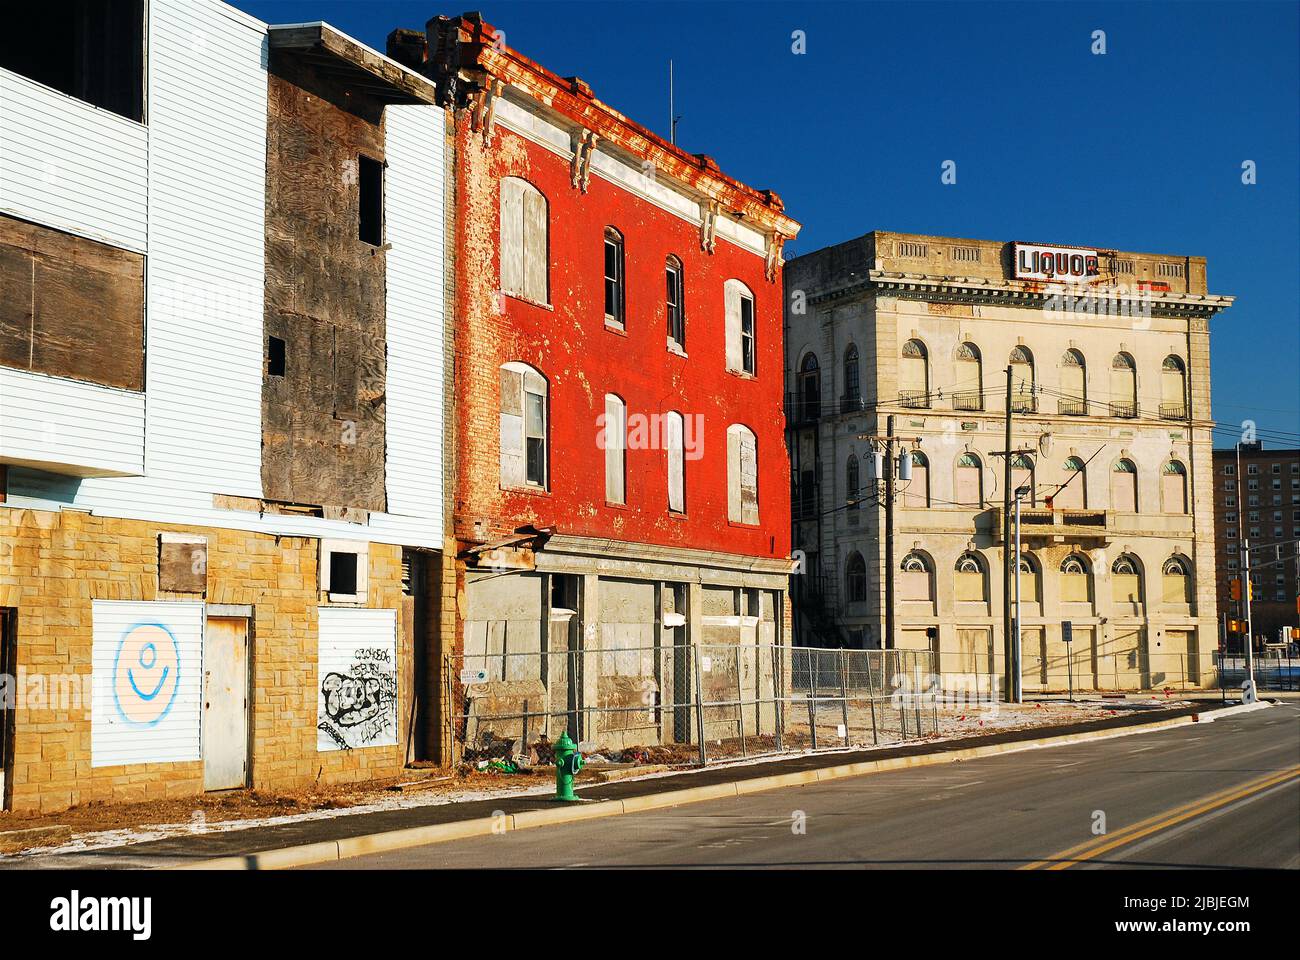 Abandoned and crumbling buildings line a city street showing the effects of urban decay Stock Photo